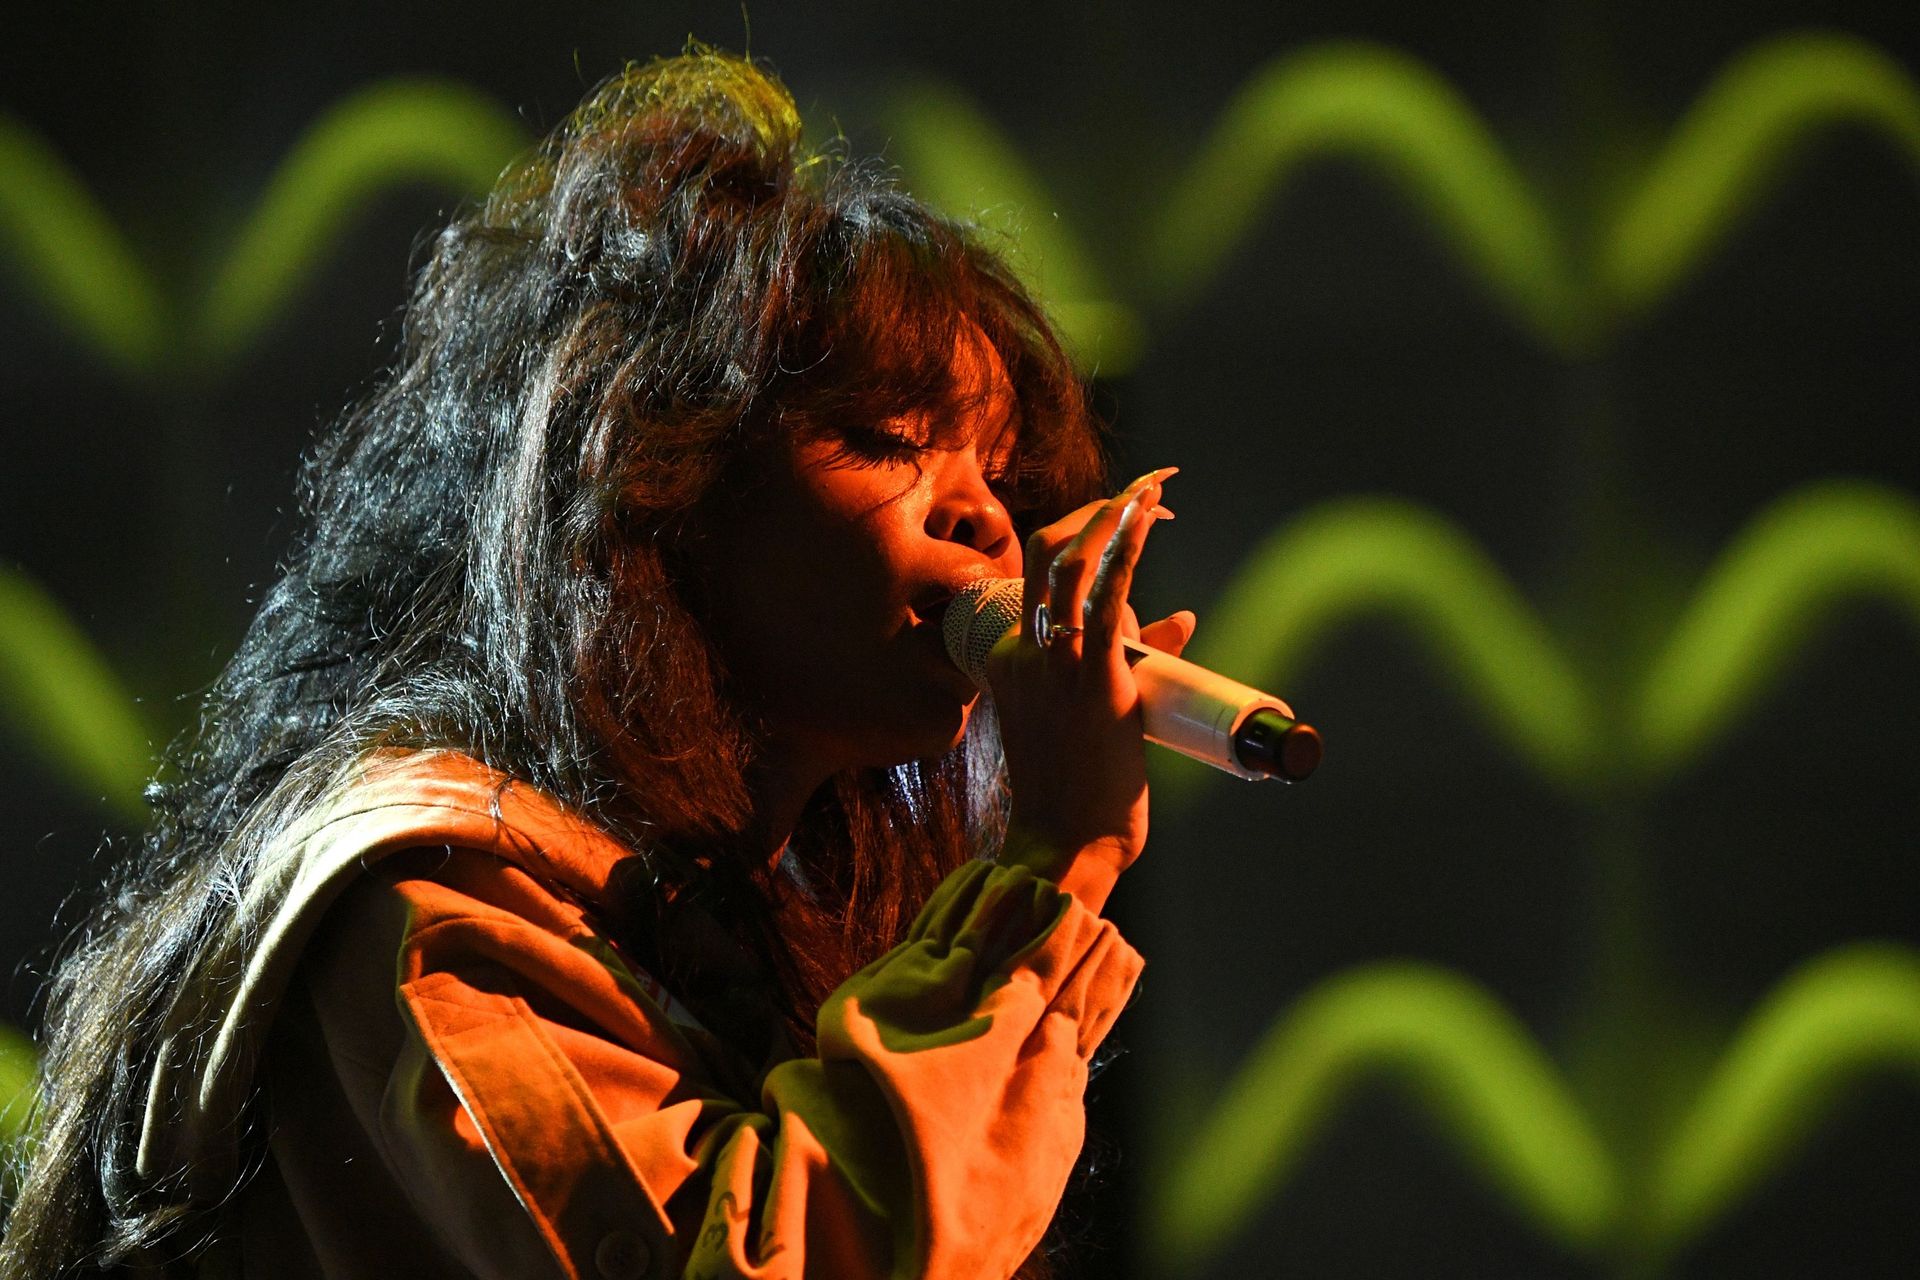 Watch SZA & Chance the Rapper Perform “Child's Play” Together In New York